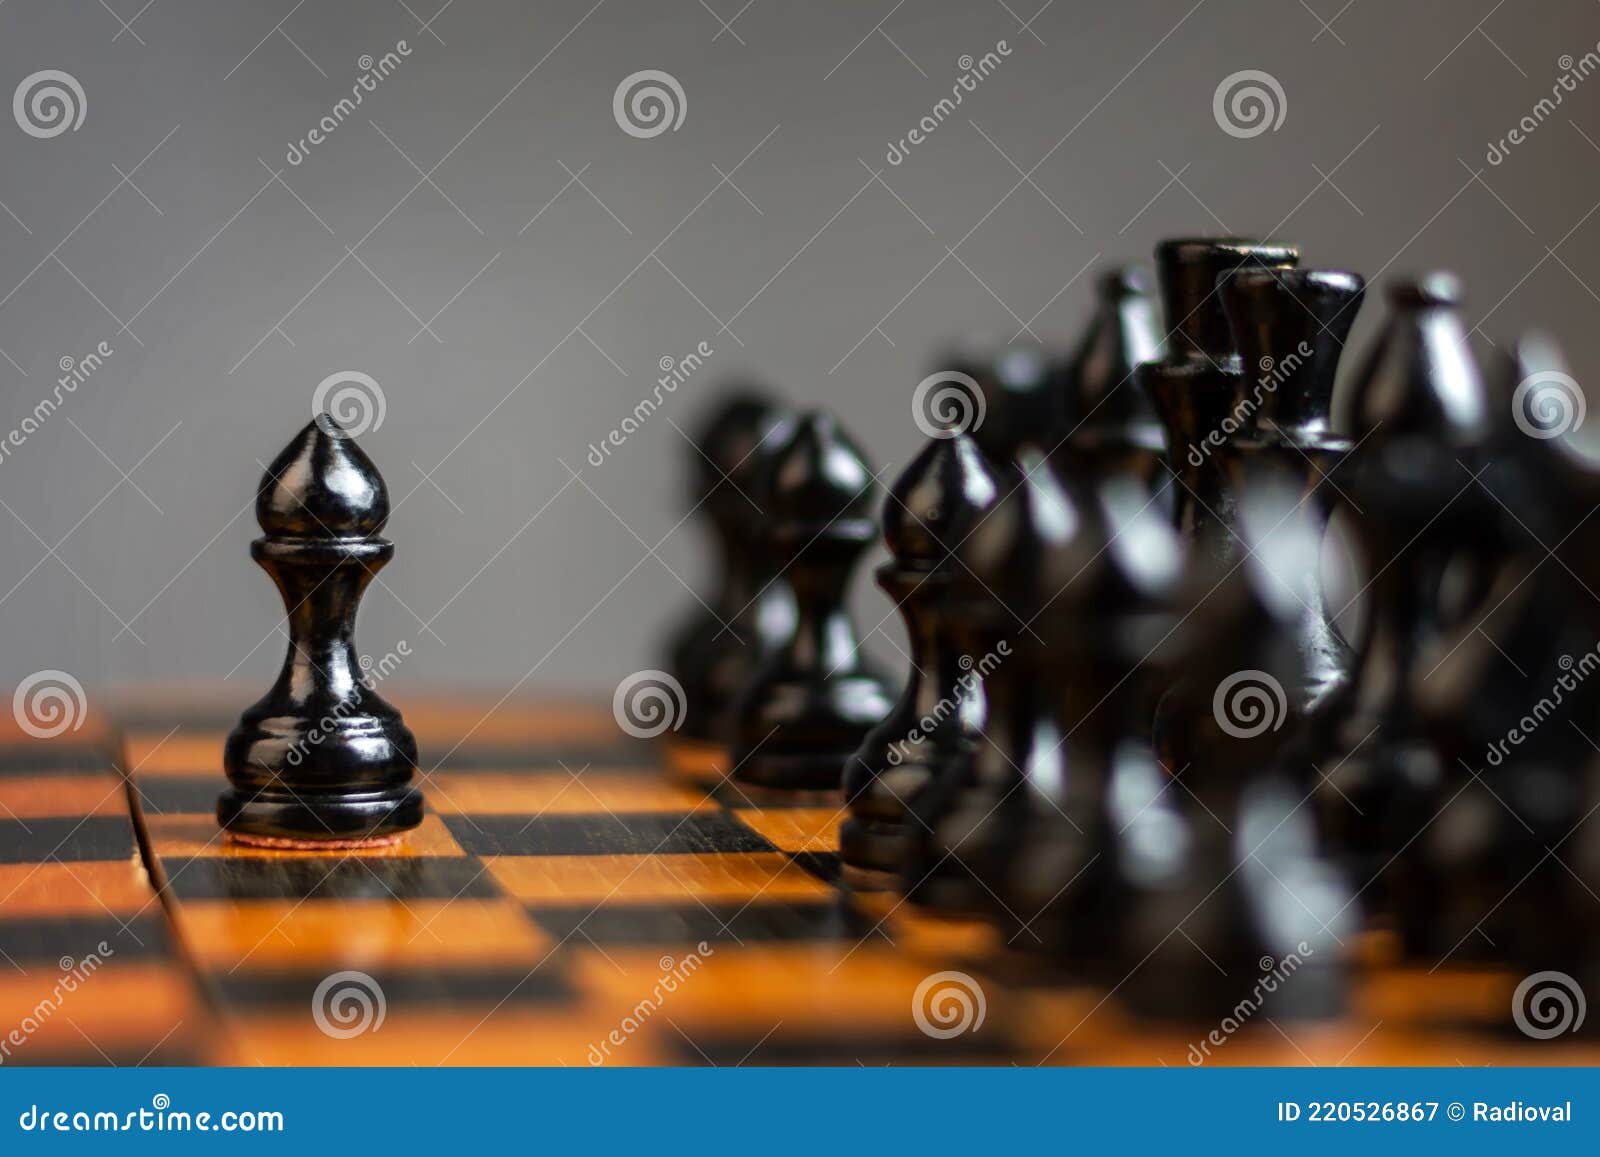 Black Pawn In Front Of The Chess Pieces Strategy Concept Correct